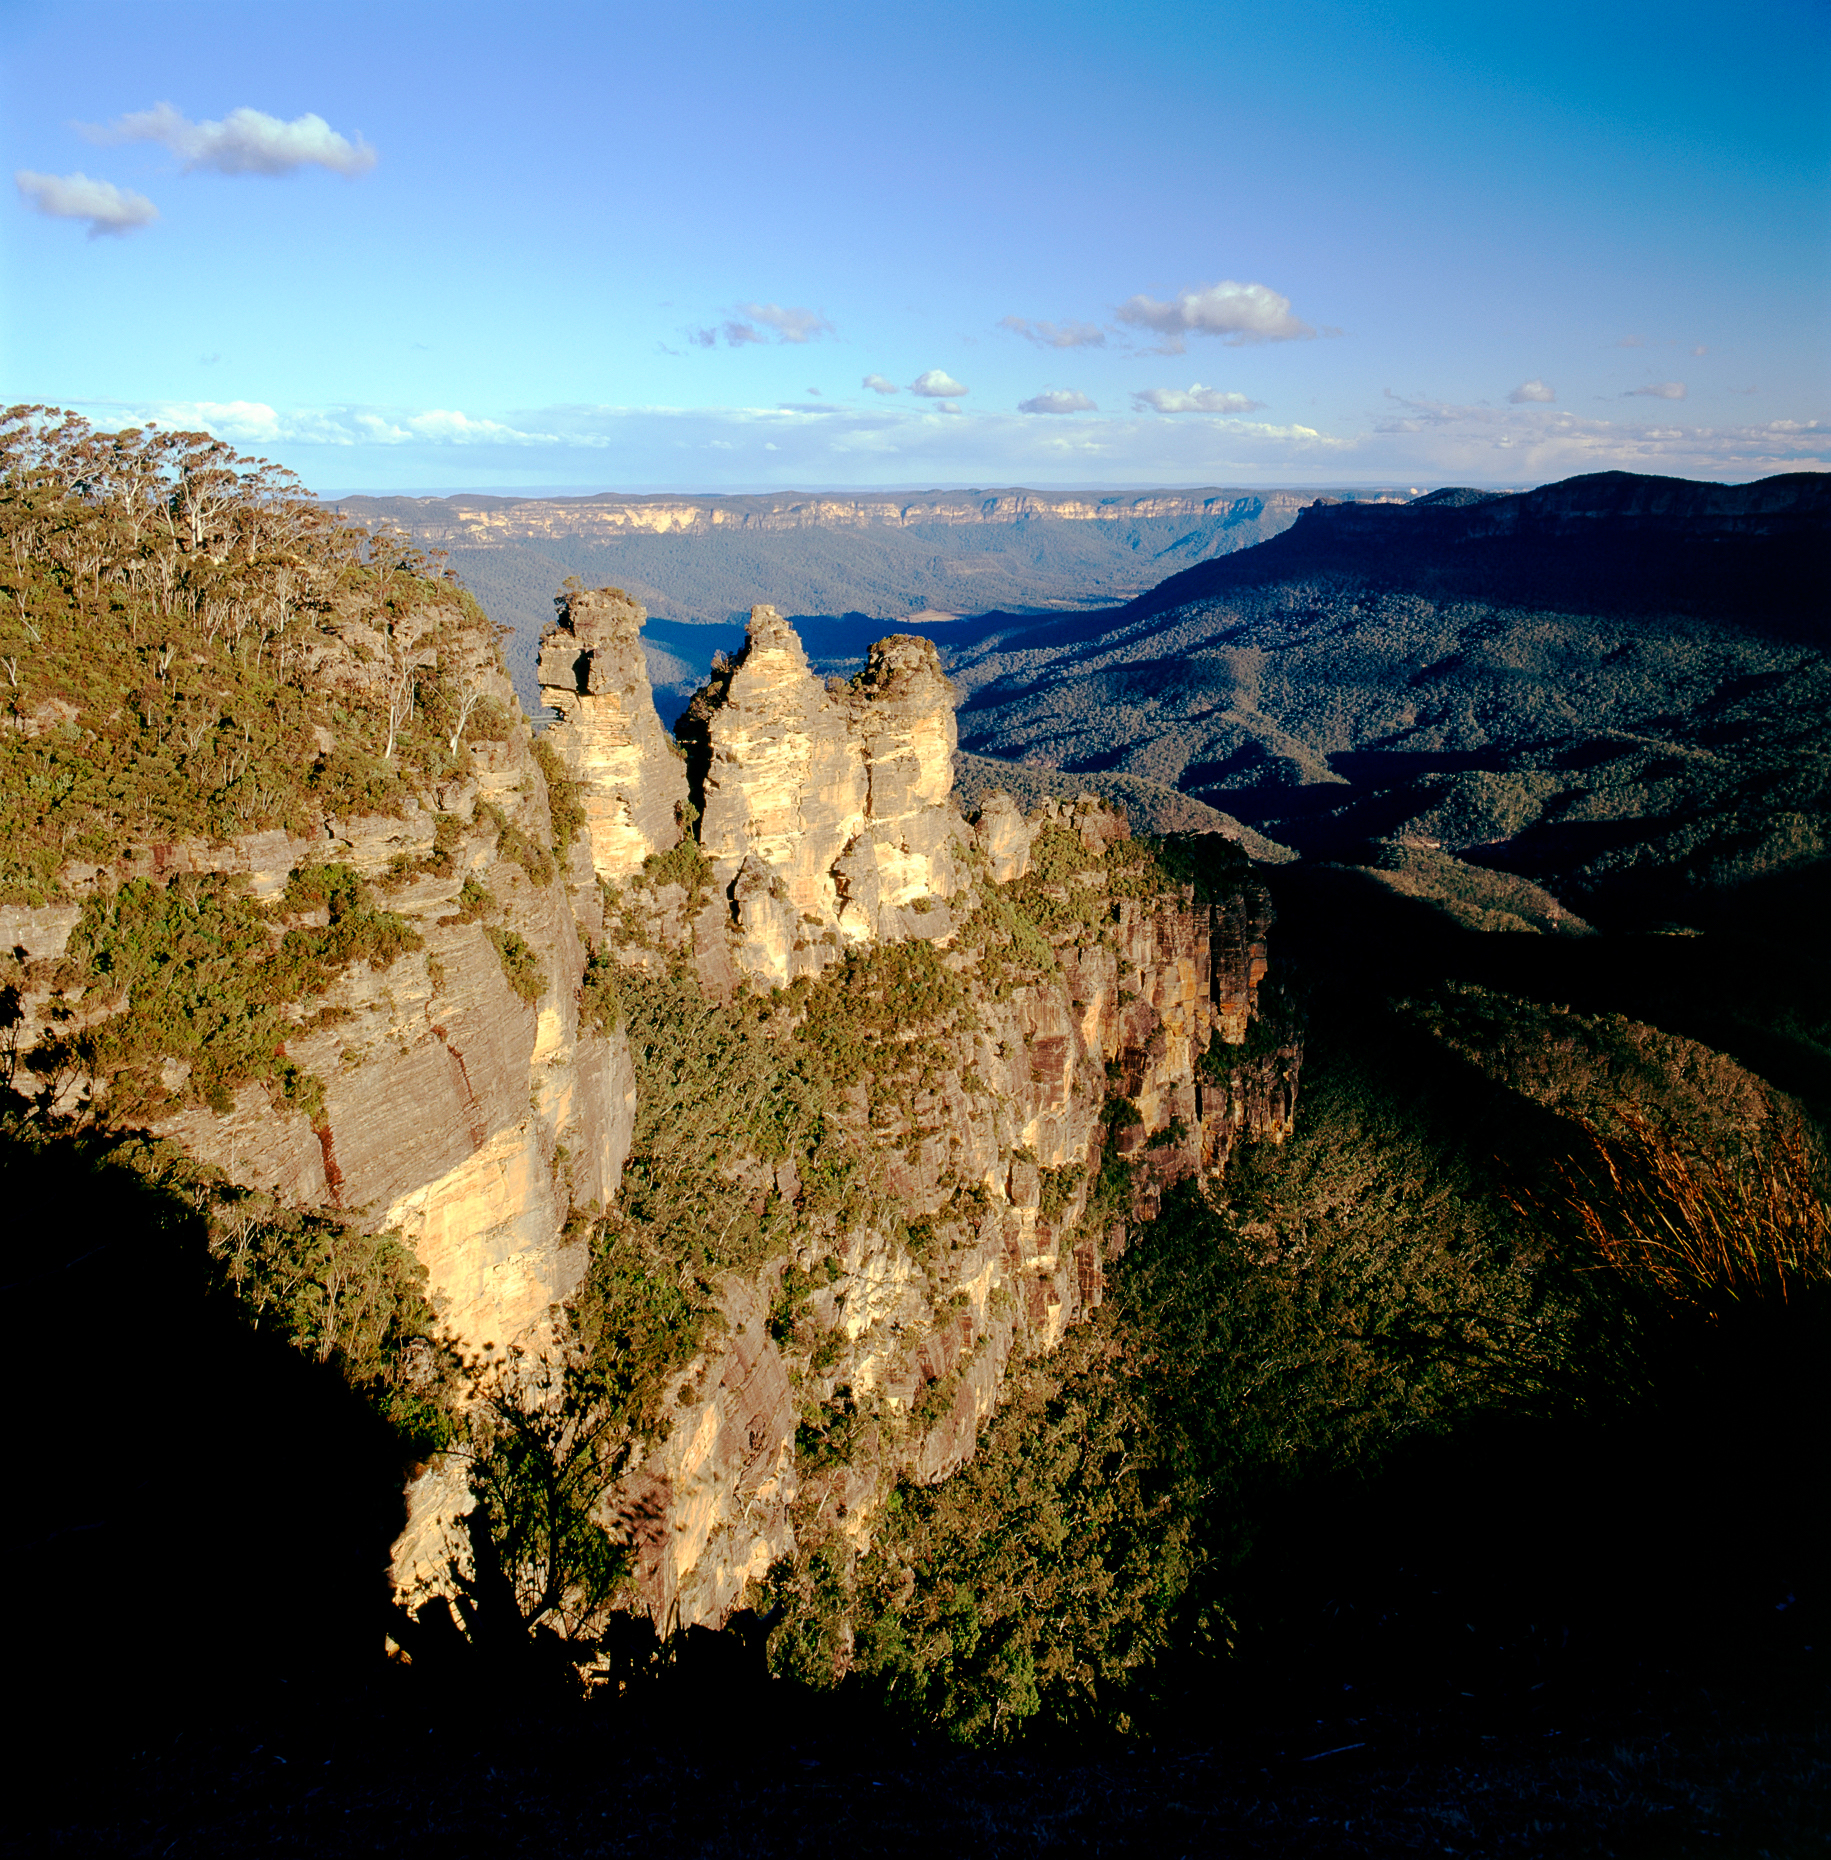 Early morning view of the Three Sisters, Blue Mountains National